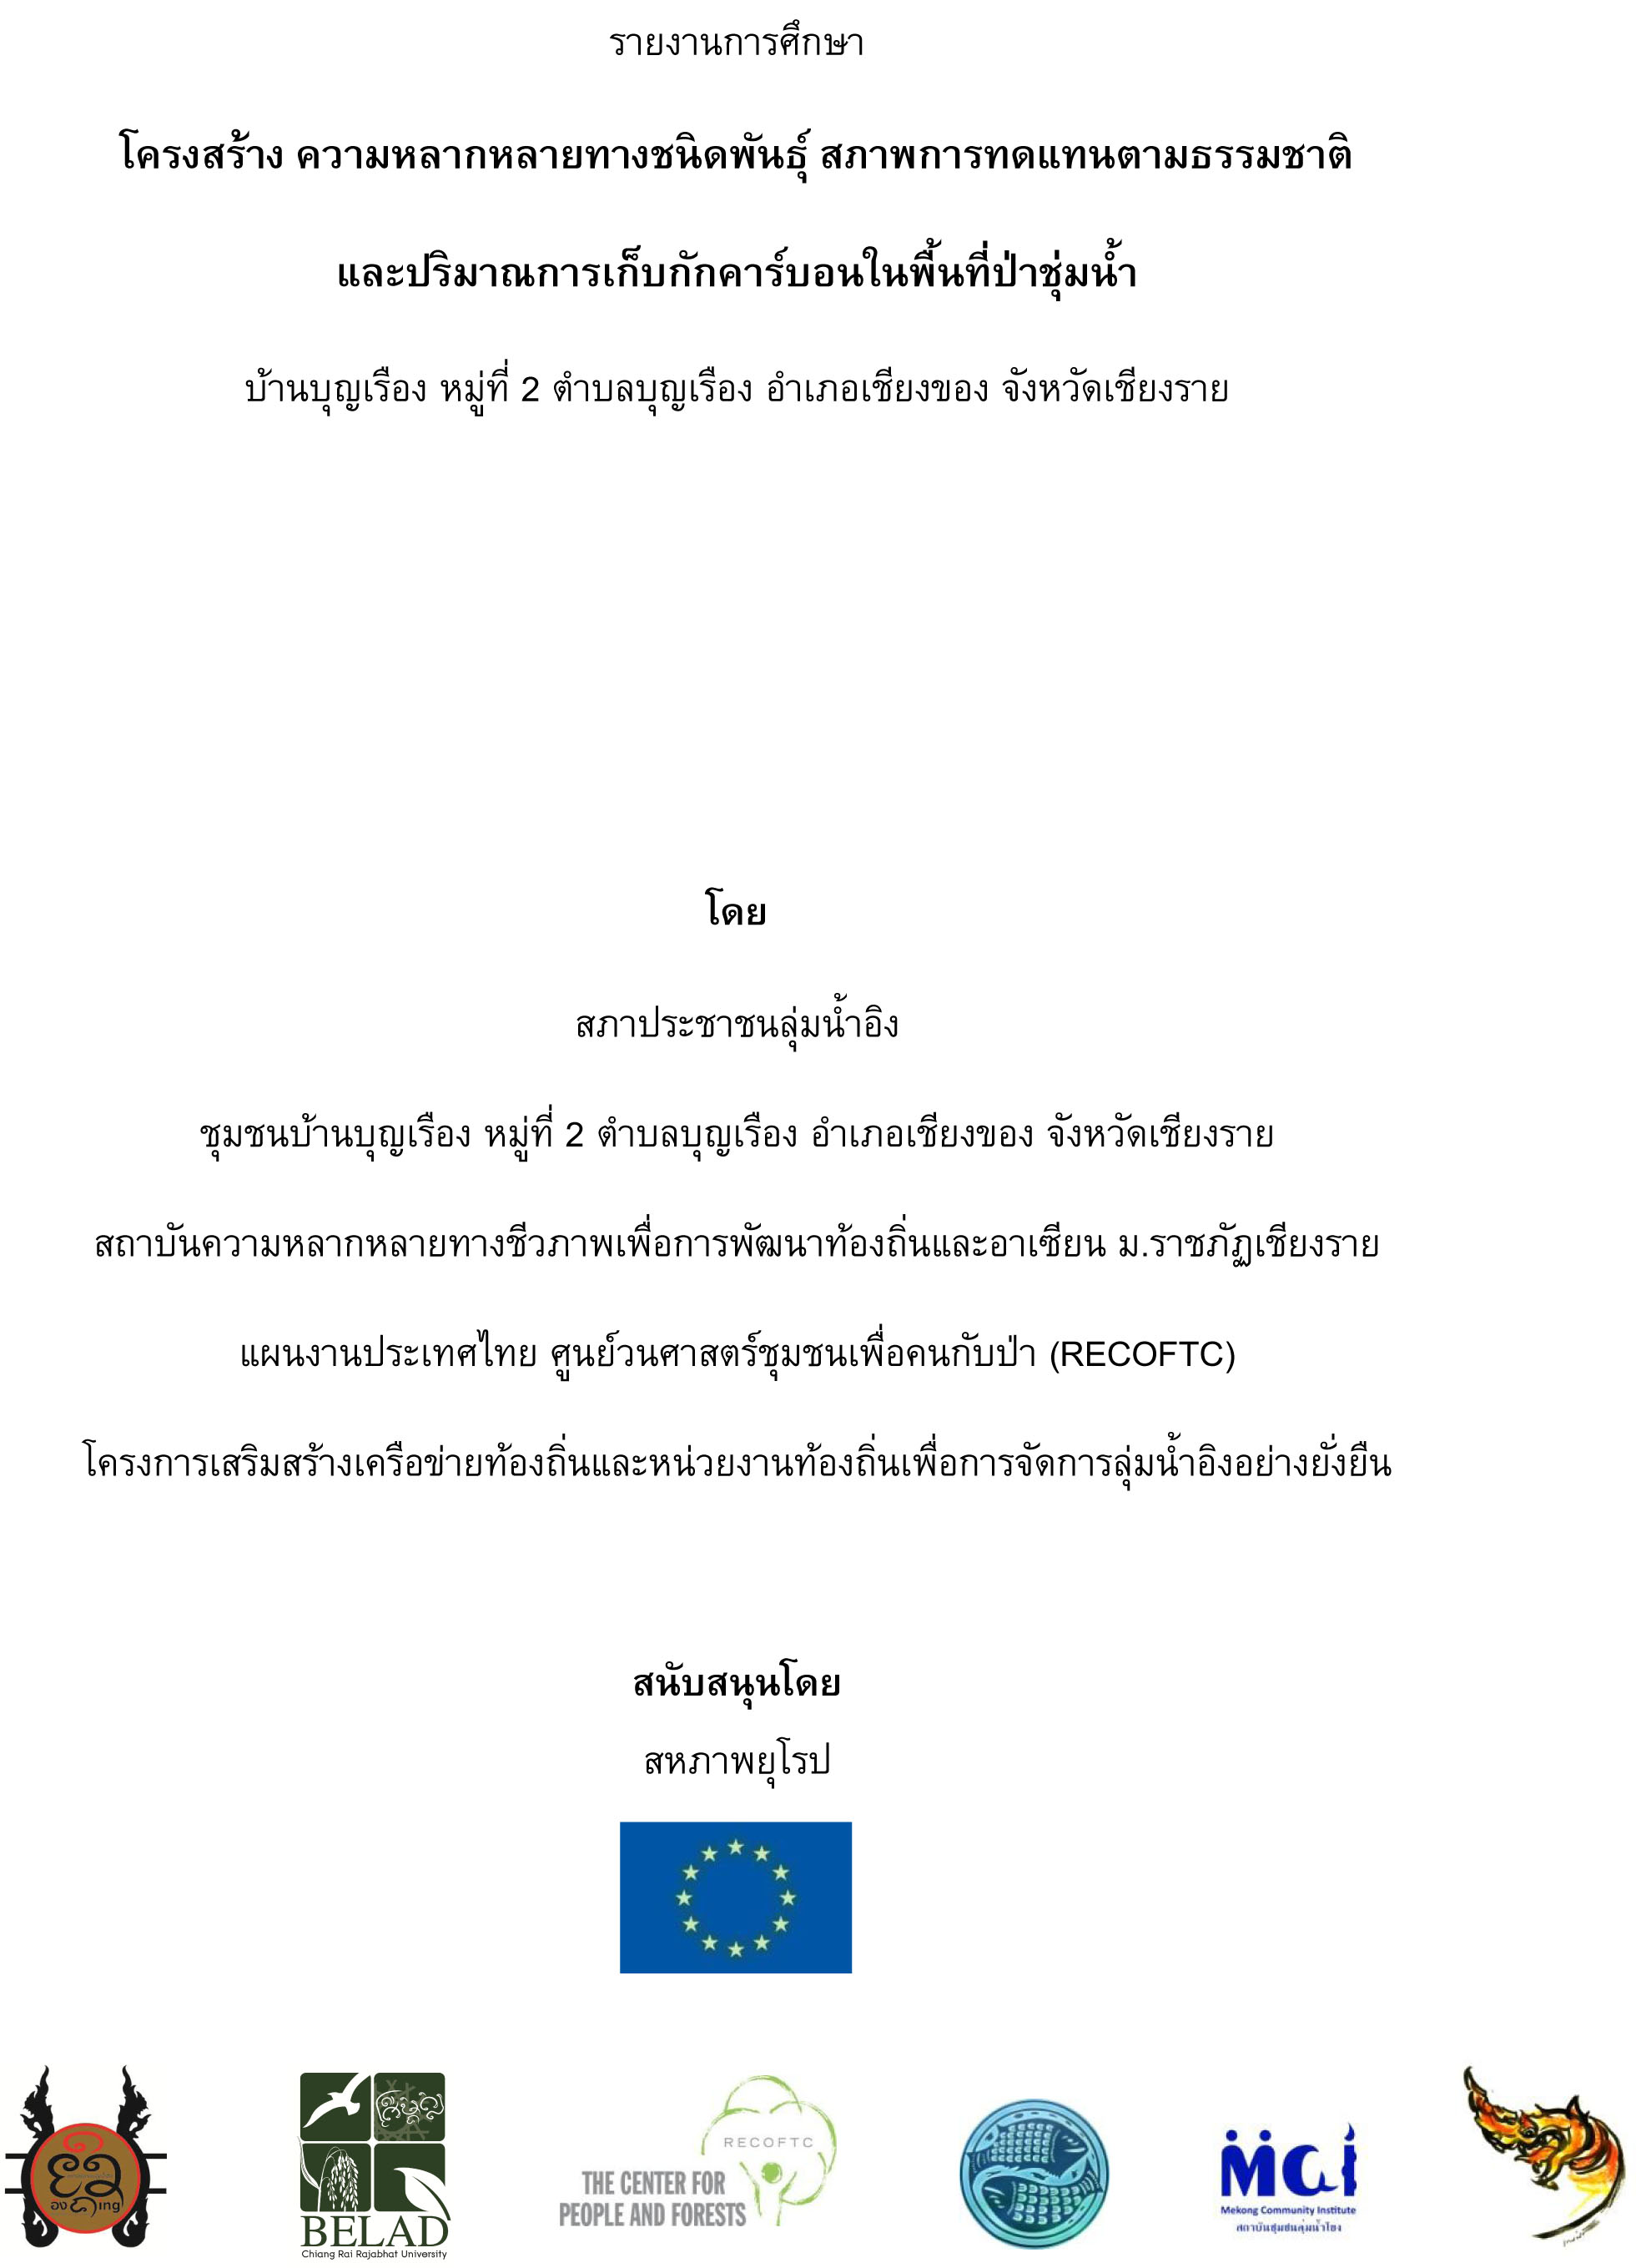 2558 05 Report on the study of forest structure and carbon at Ban Boon Rueang